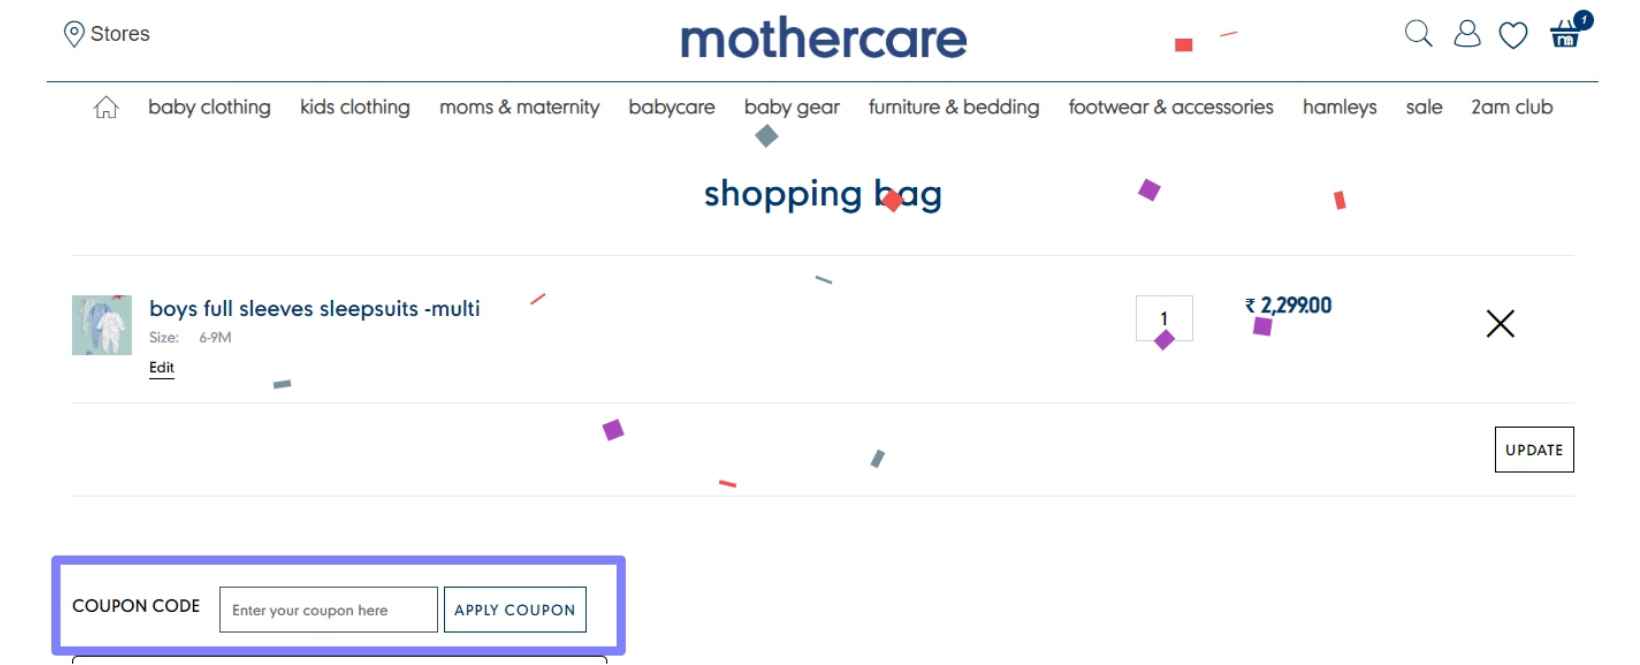 How to Use MotherCare Coupon Code